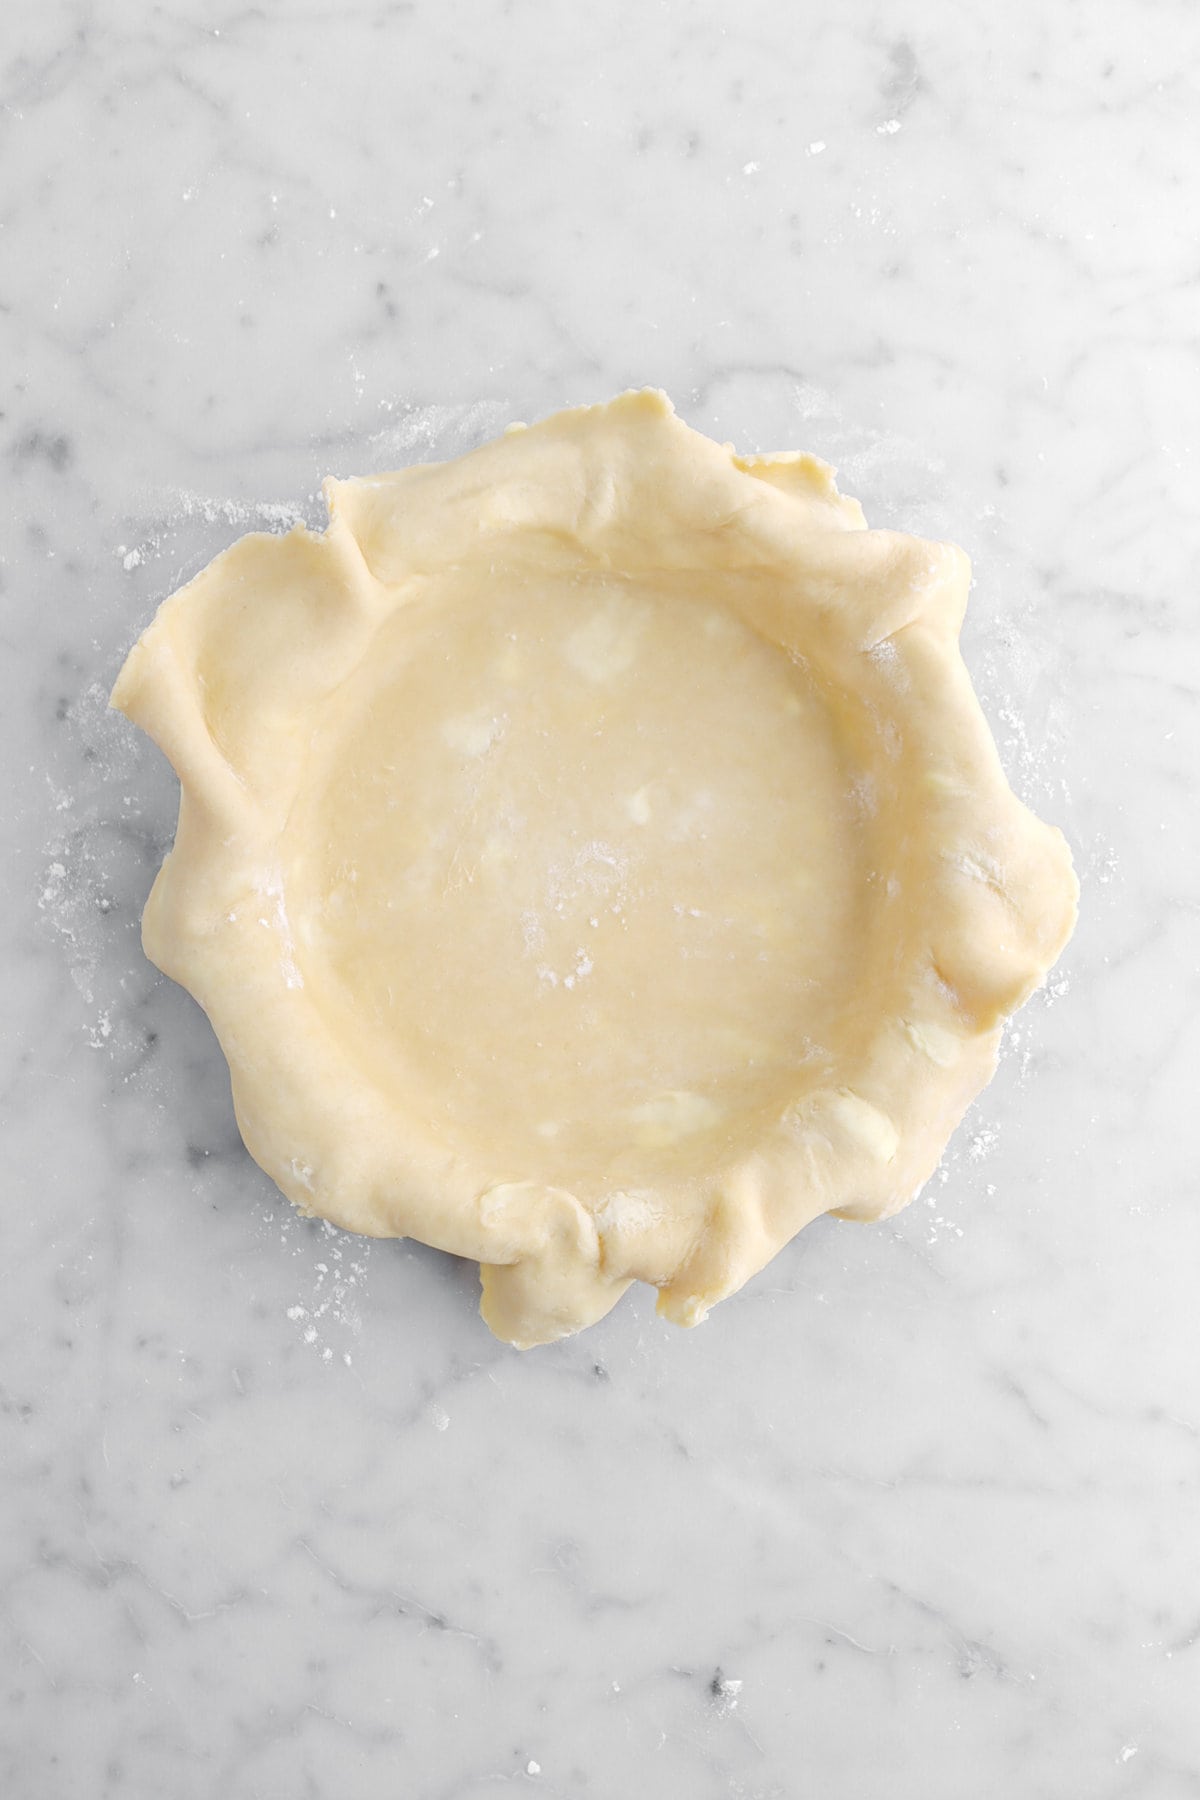 pie dough fitted to pie pan with excess hanging off edges.